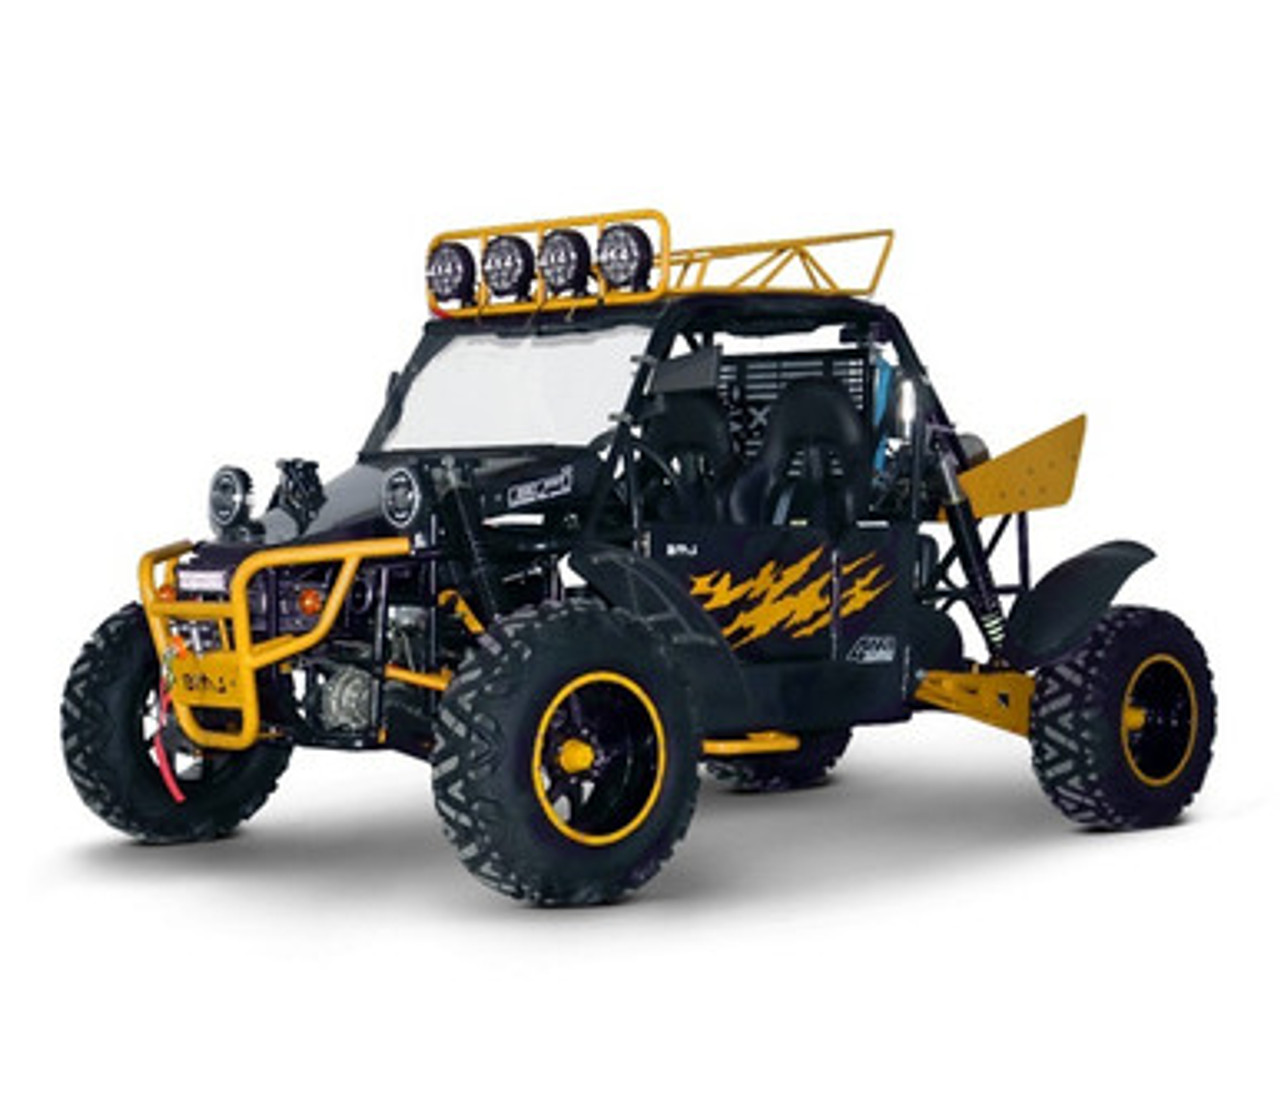 Bms Dune Buggy Sand SNIPER T1000 2S 2 seat, Fully Automatic - Fully Assembled And Tested